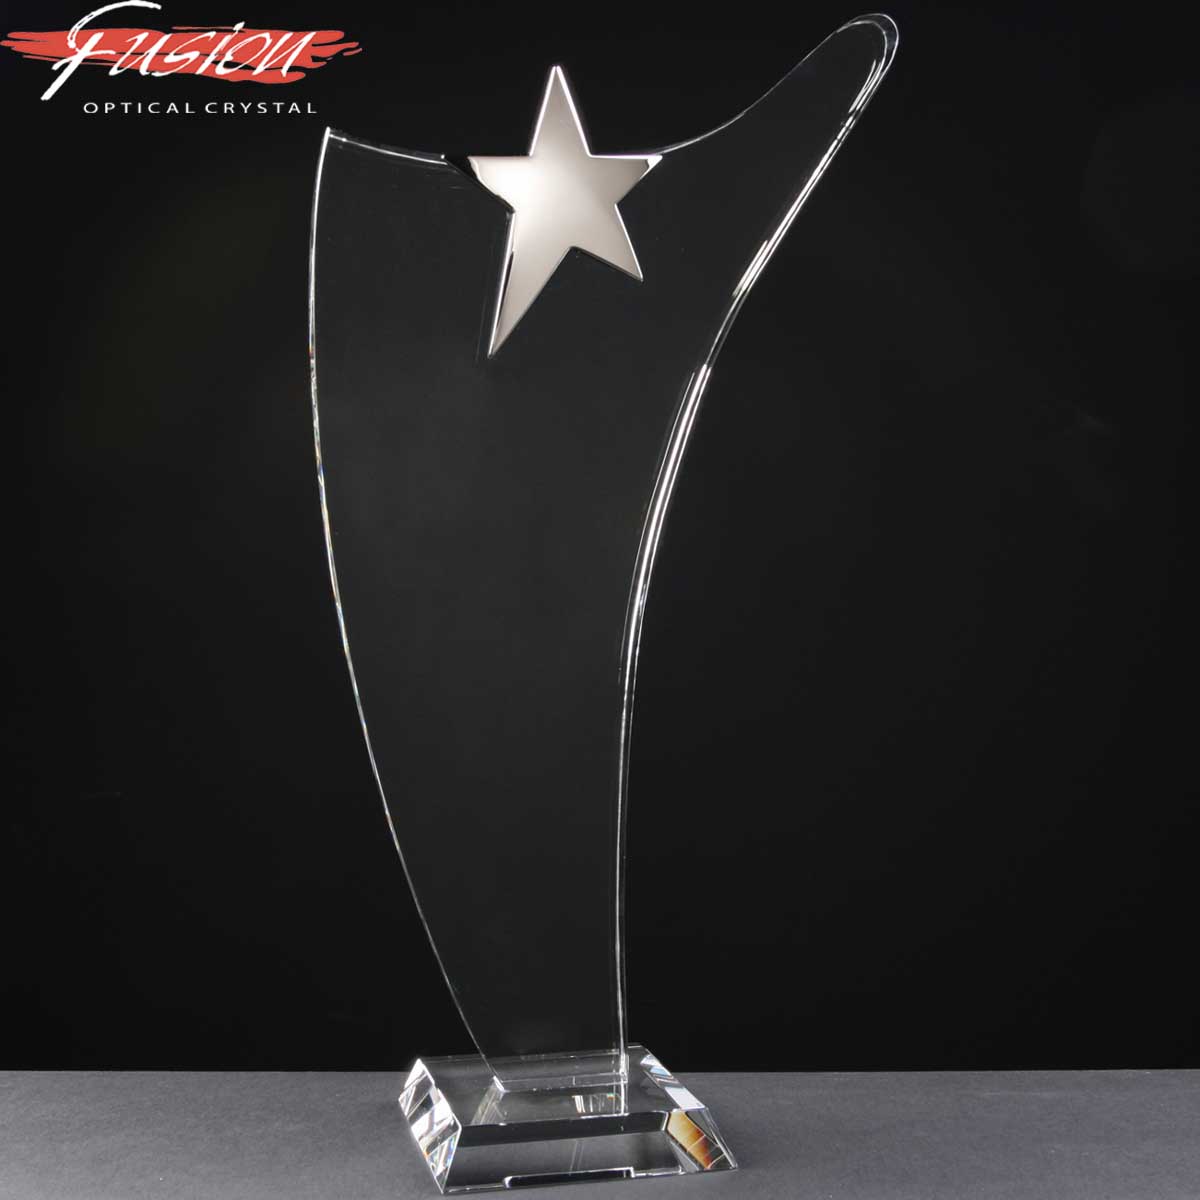 Crystal & Chrome Award, engraved for Employee Recognition Award.